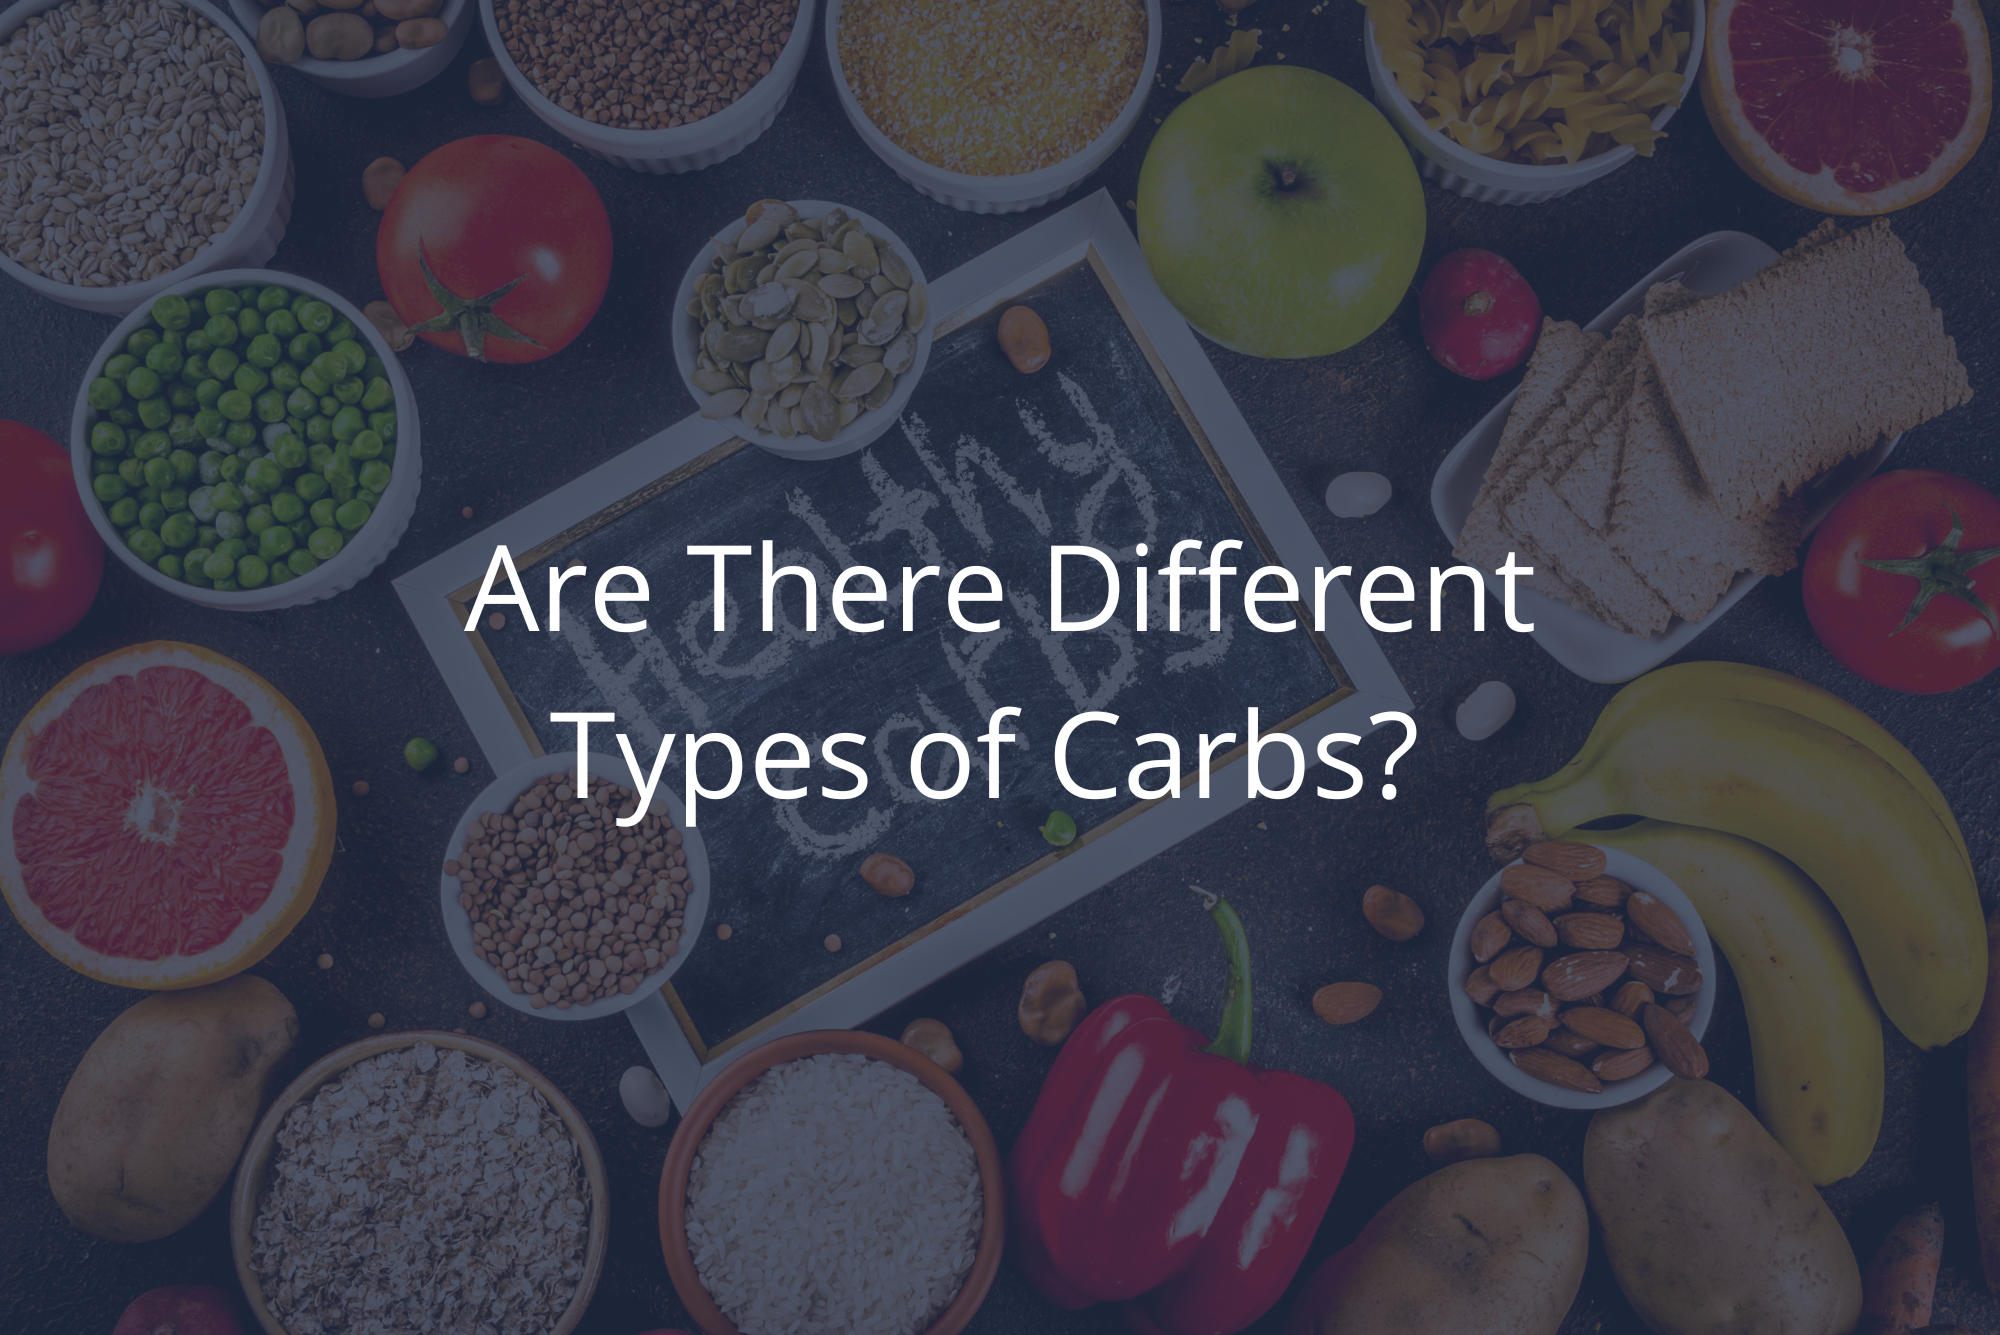 An assorted spread of carb-rich foods answers the question, “Are there different types of carbs?”